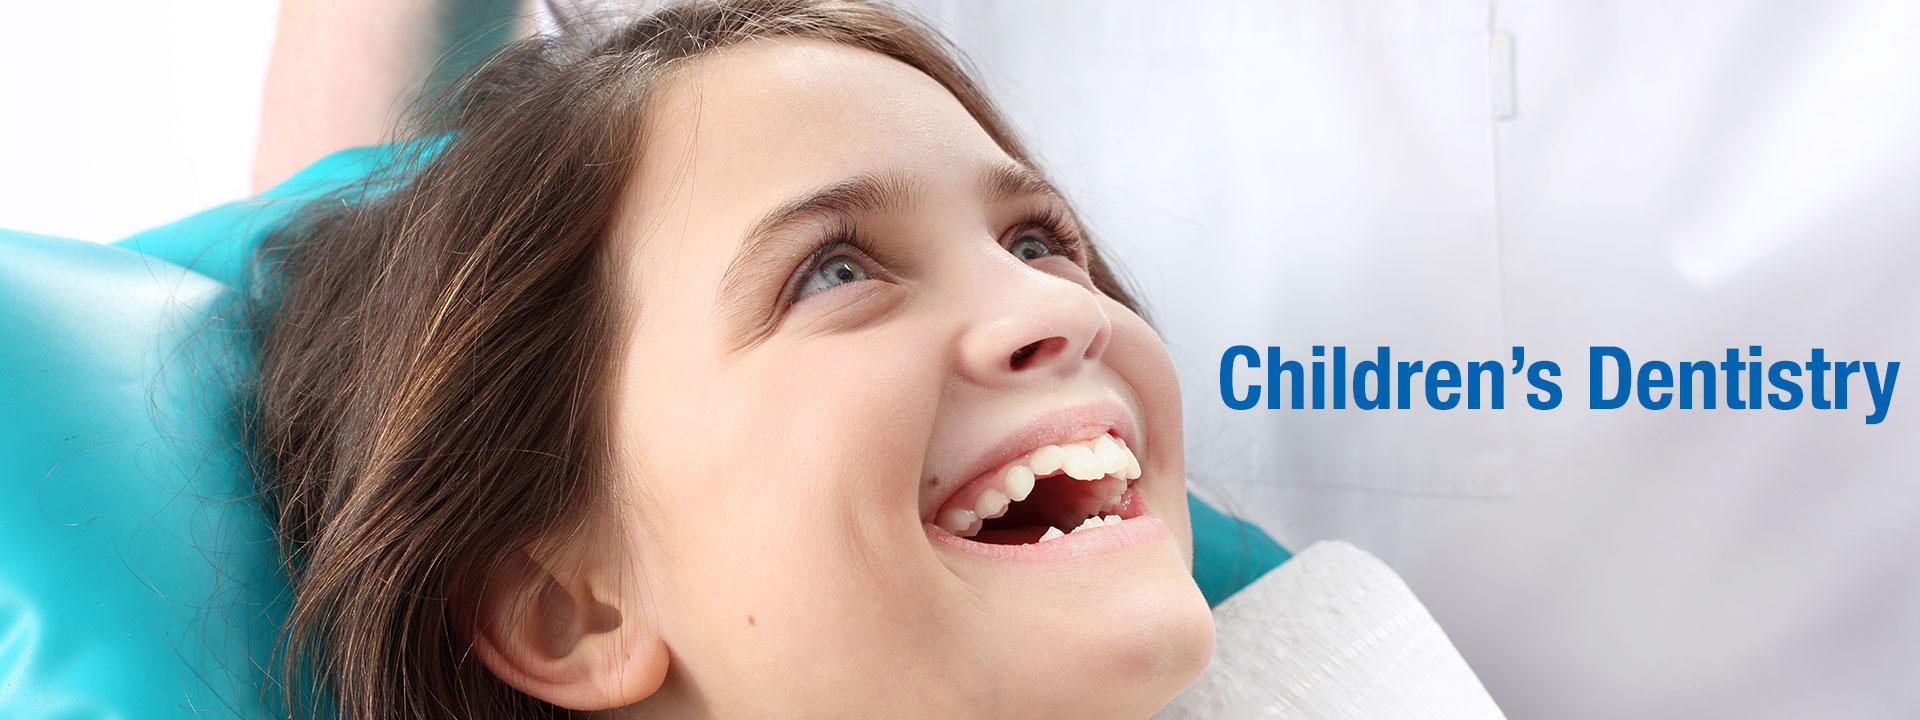 children's dentistry - child sitting on a dentist chair and smiling